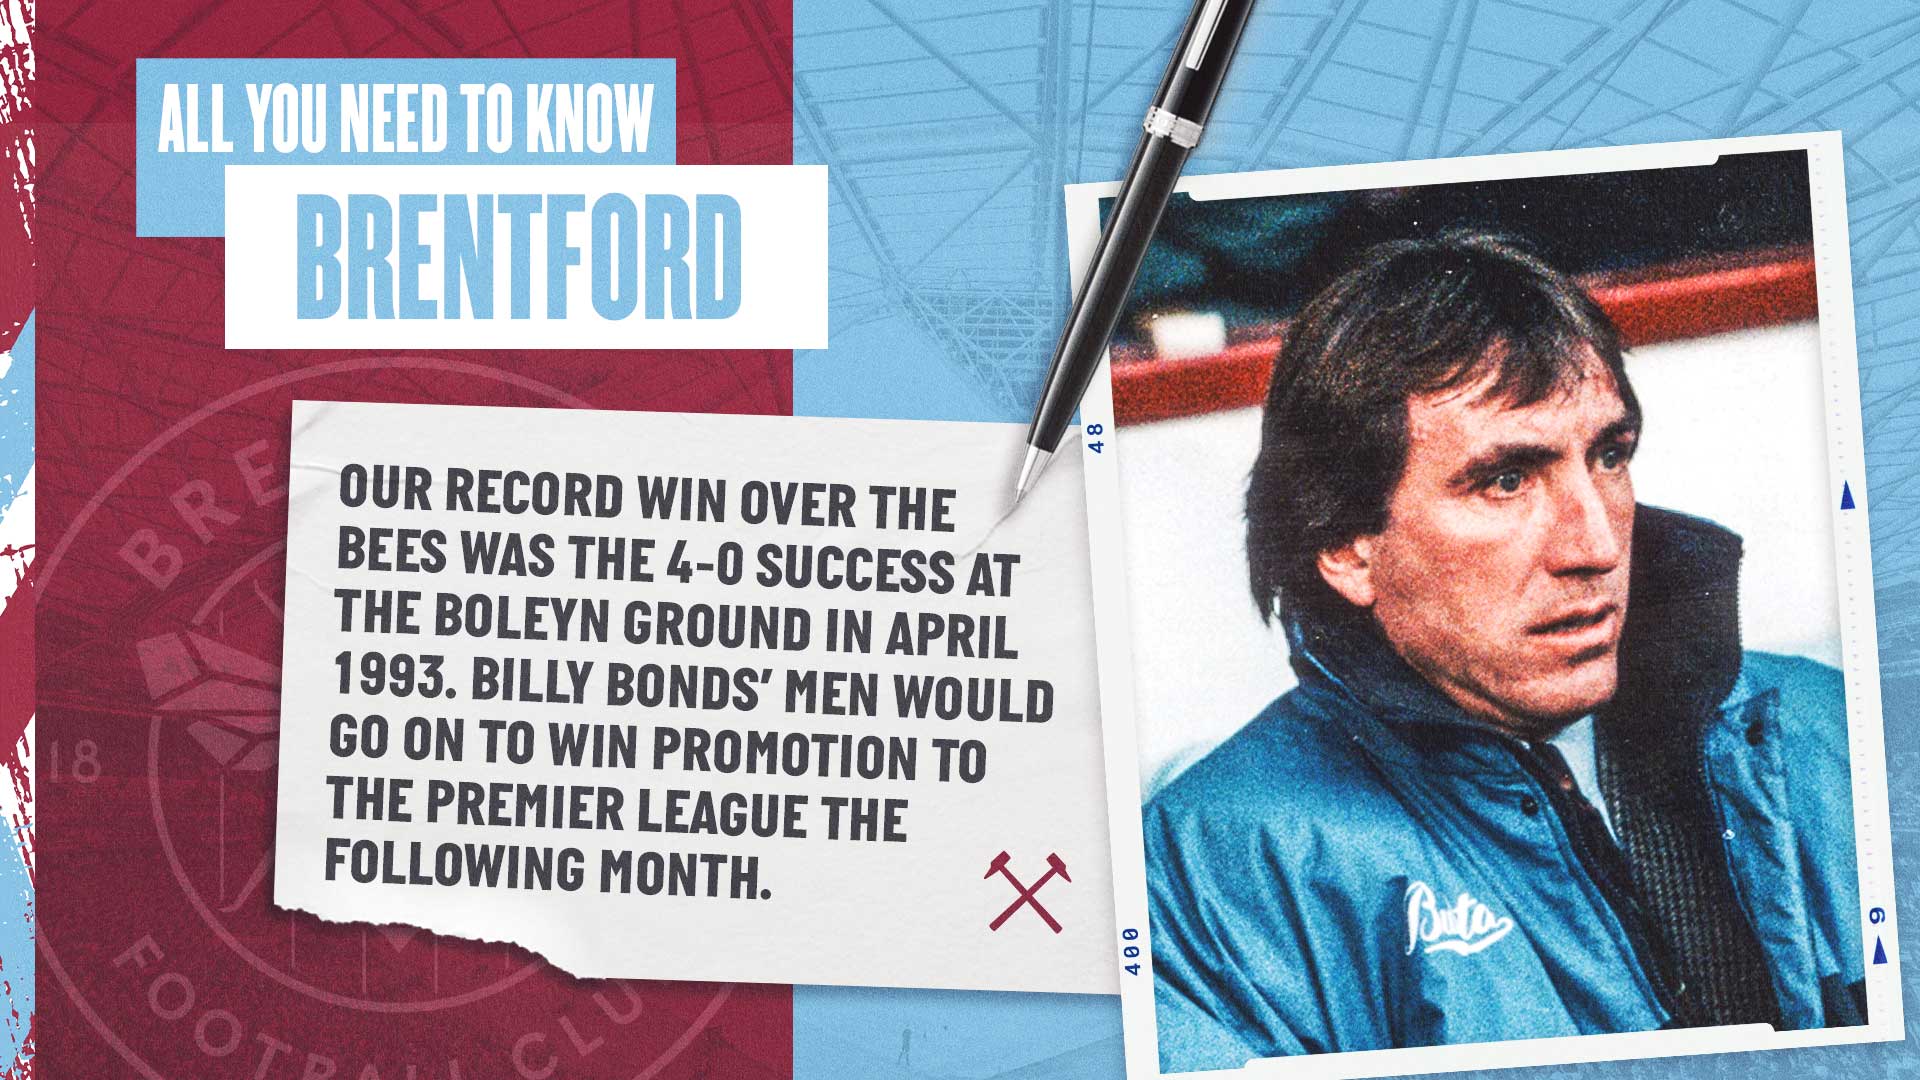 Brentford all you need to know fact 2